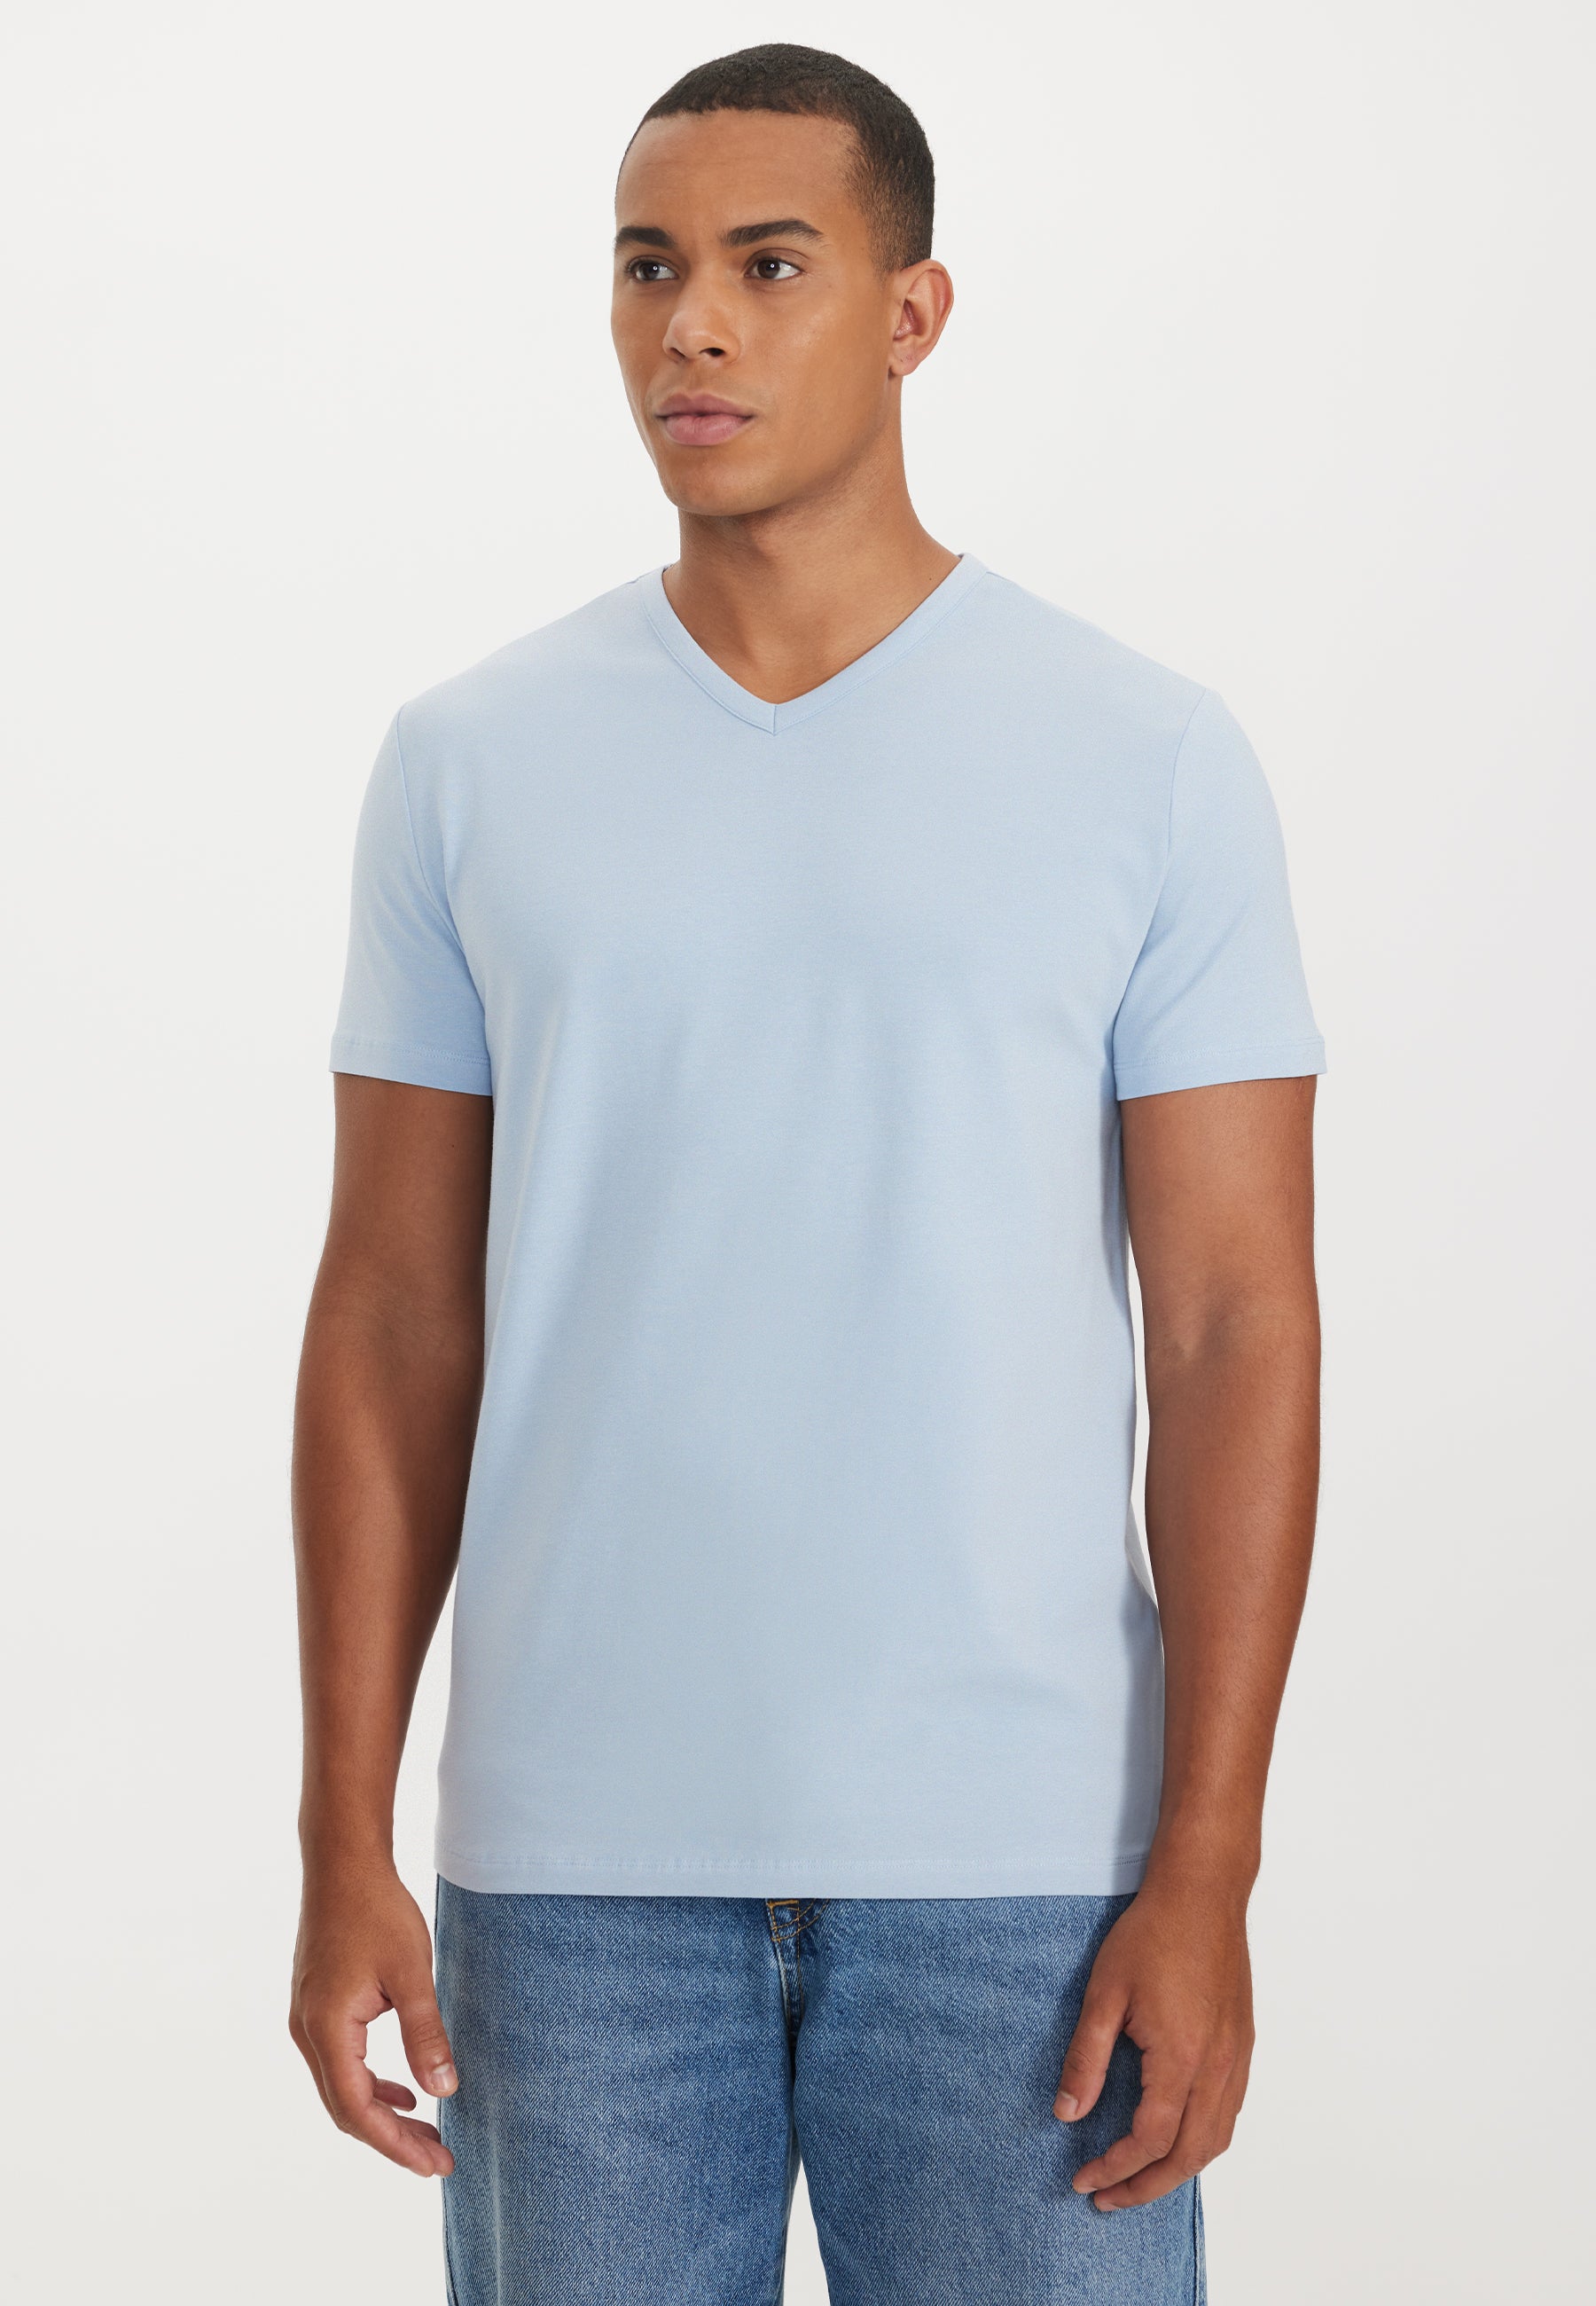 THEO V-NECK TEE in Baby Blue